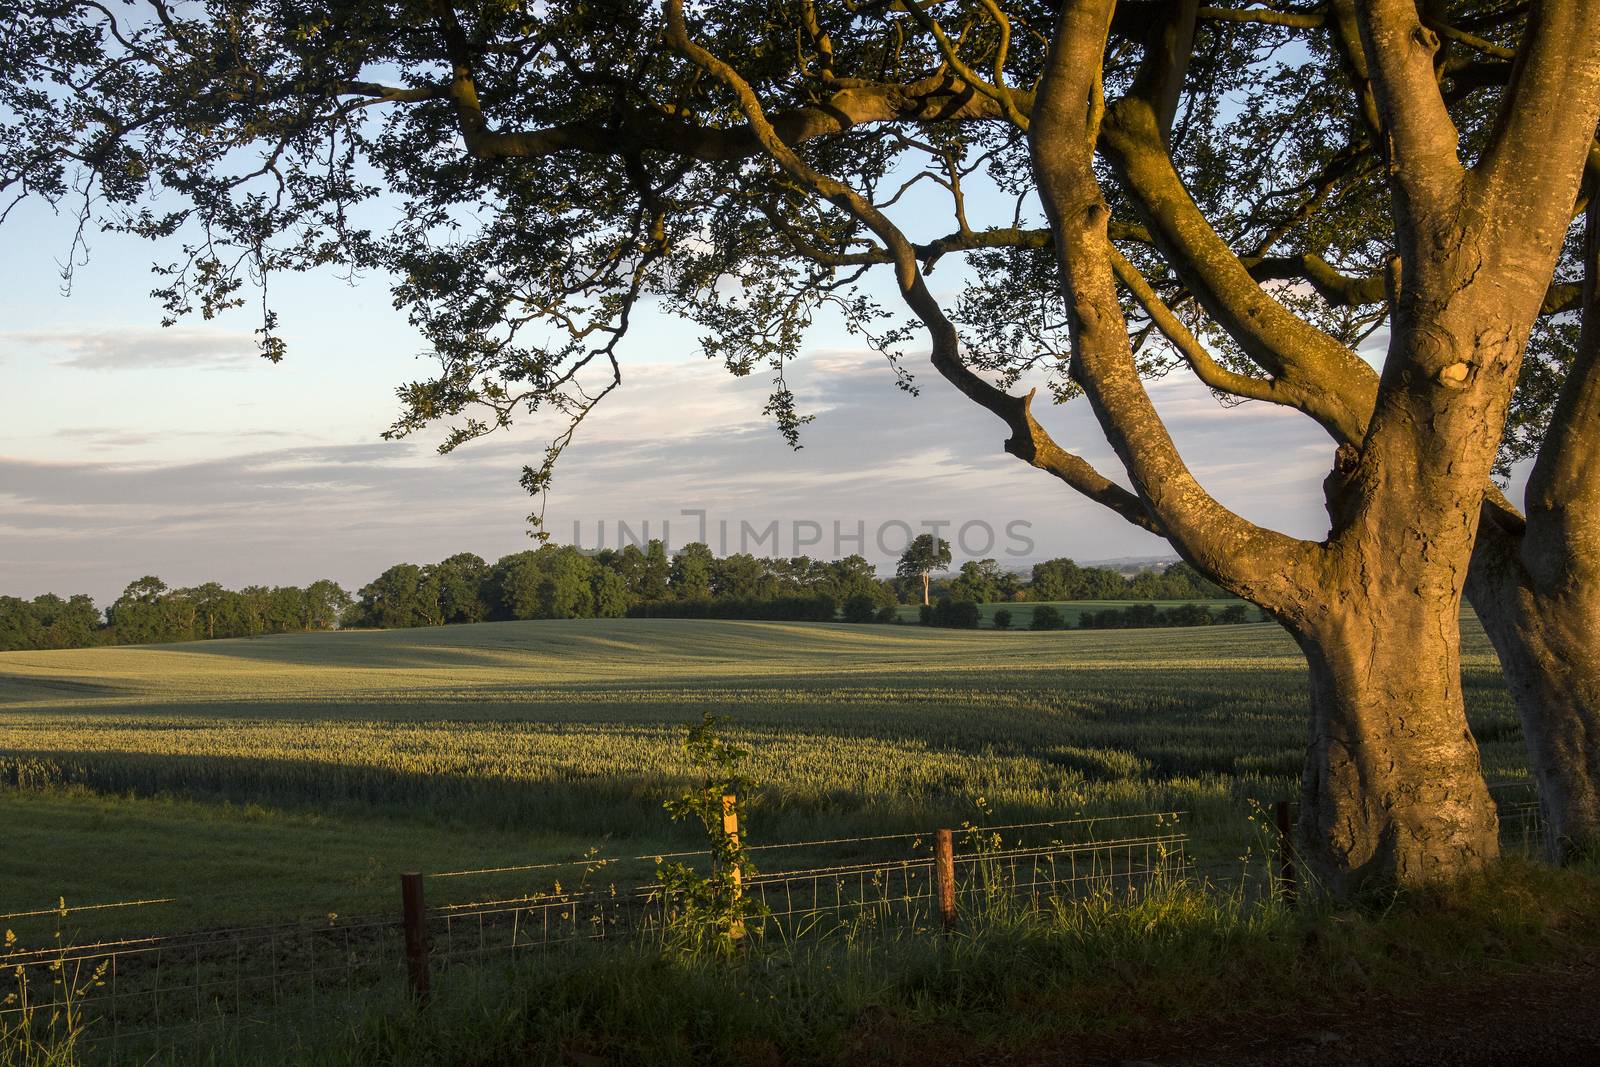 Early morning sunlight on the trees and fields of rural Ireland - County Antrim in Northern Ireland.